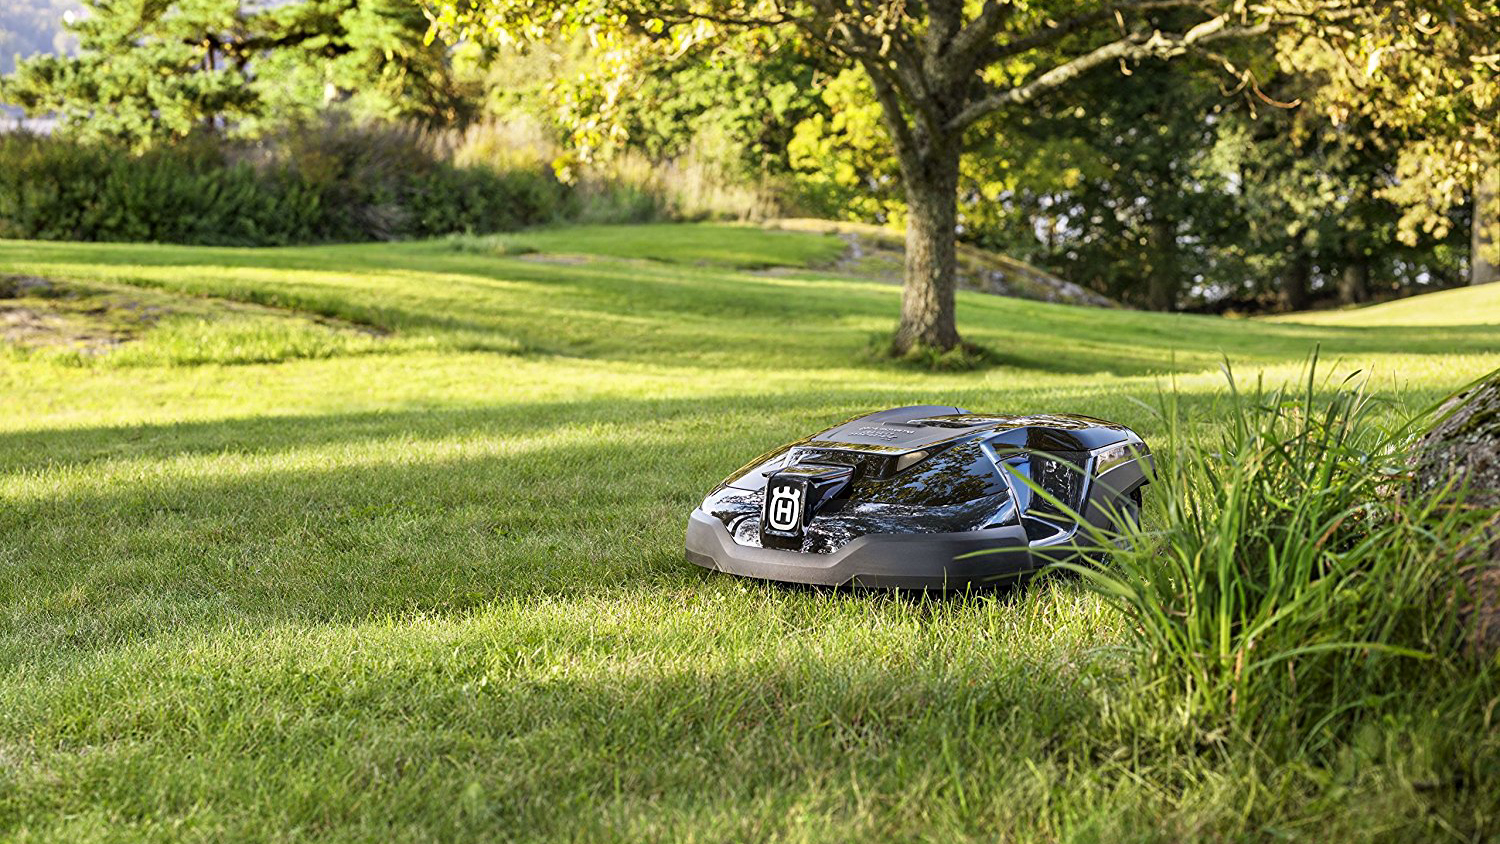 Robotic mowers can be a big time saver in your landscape, giving you more time to tend to the garden. Image: Husqvarna.